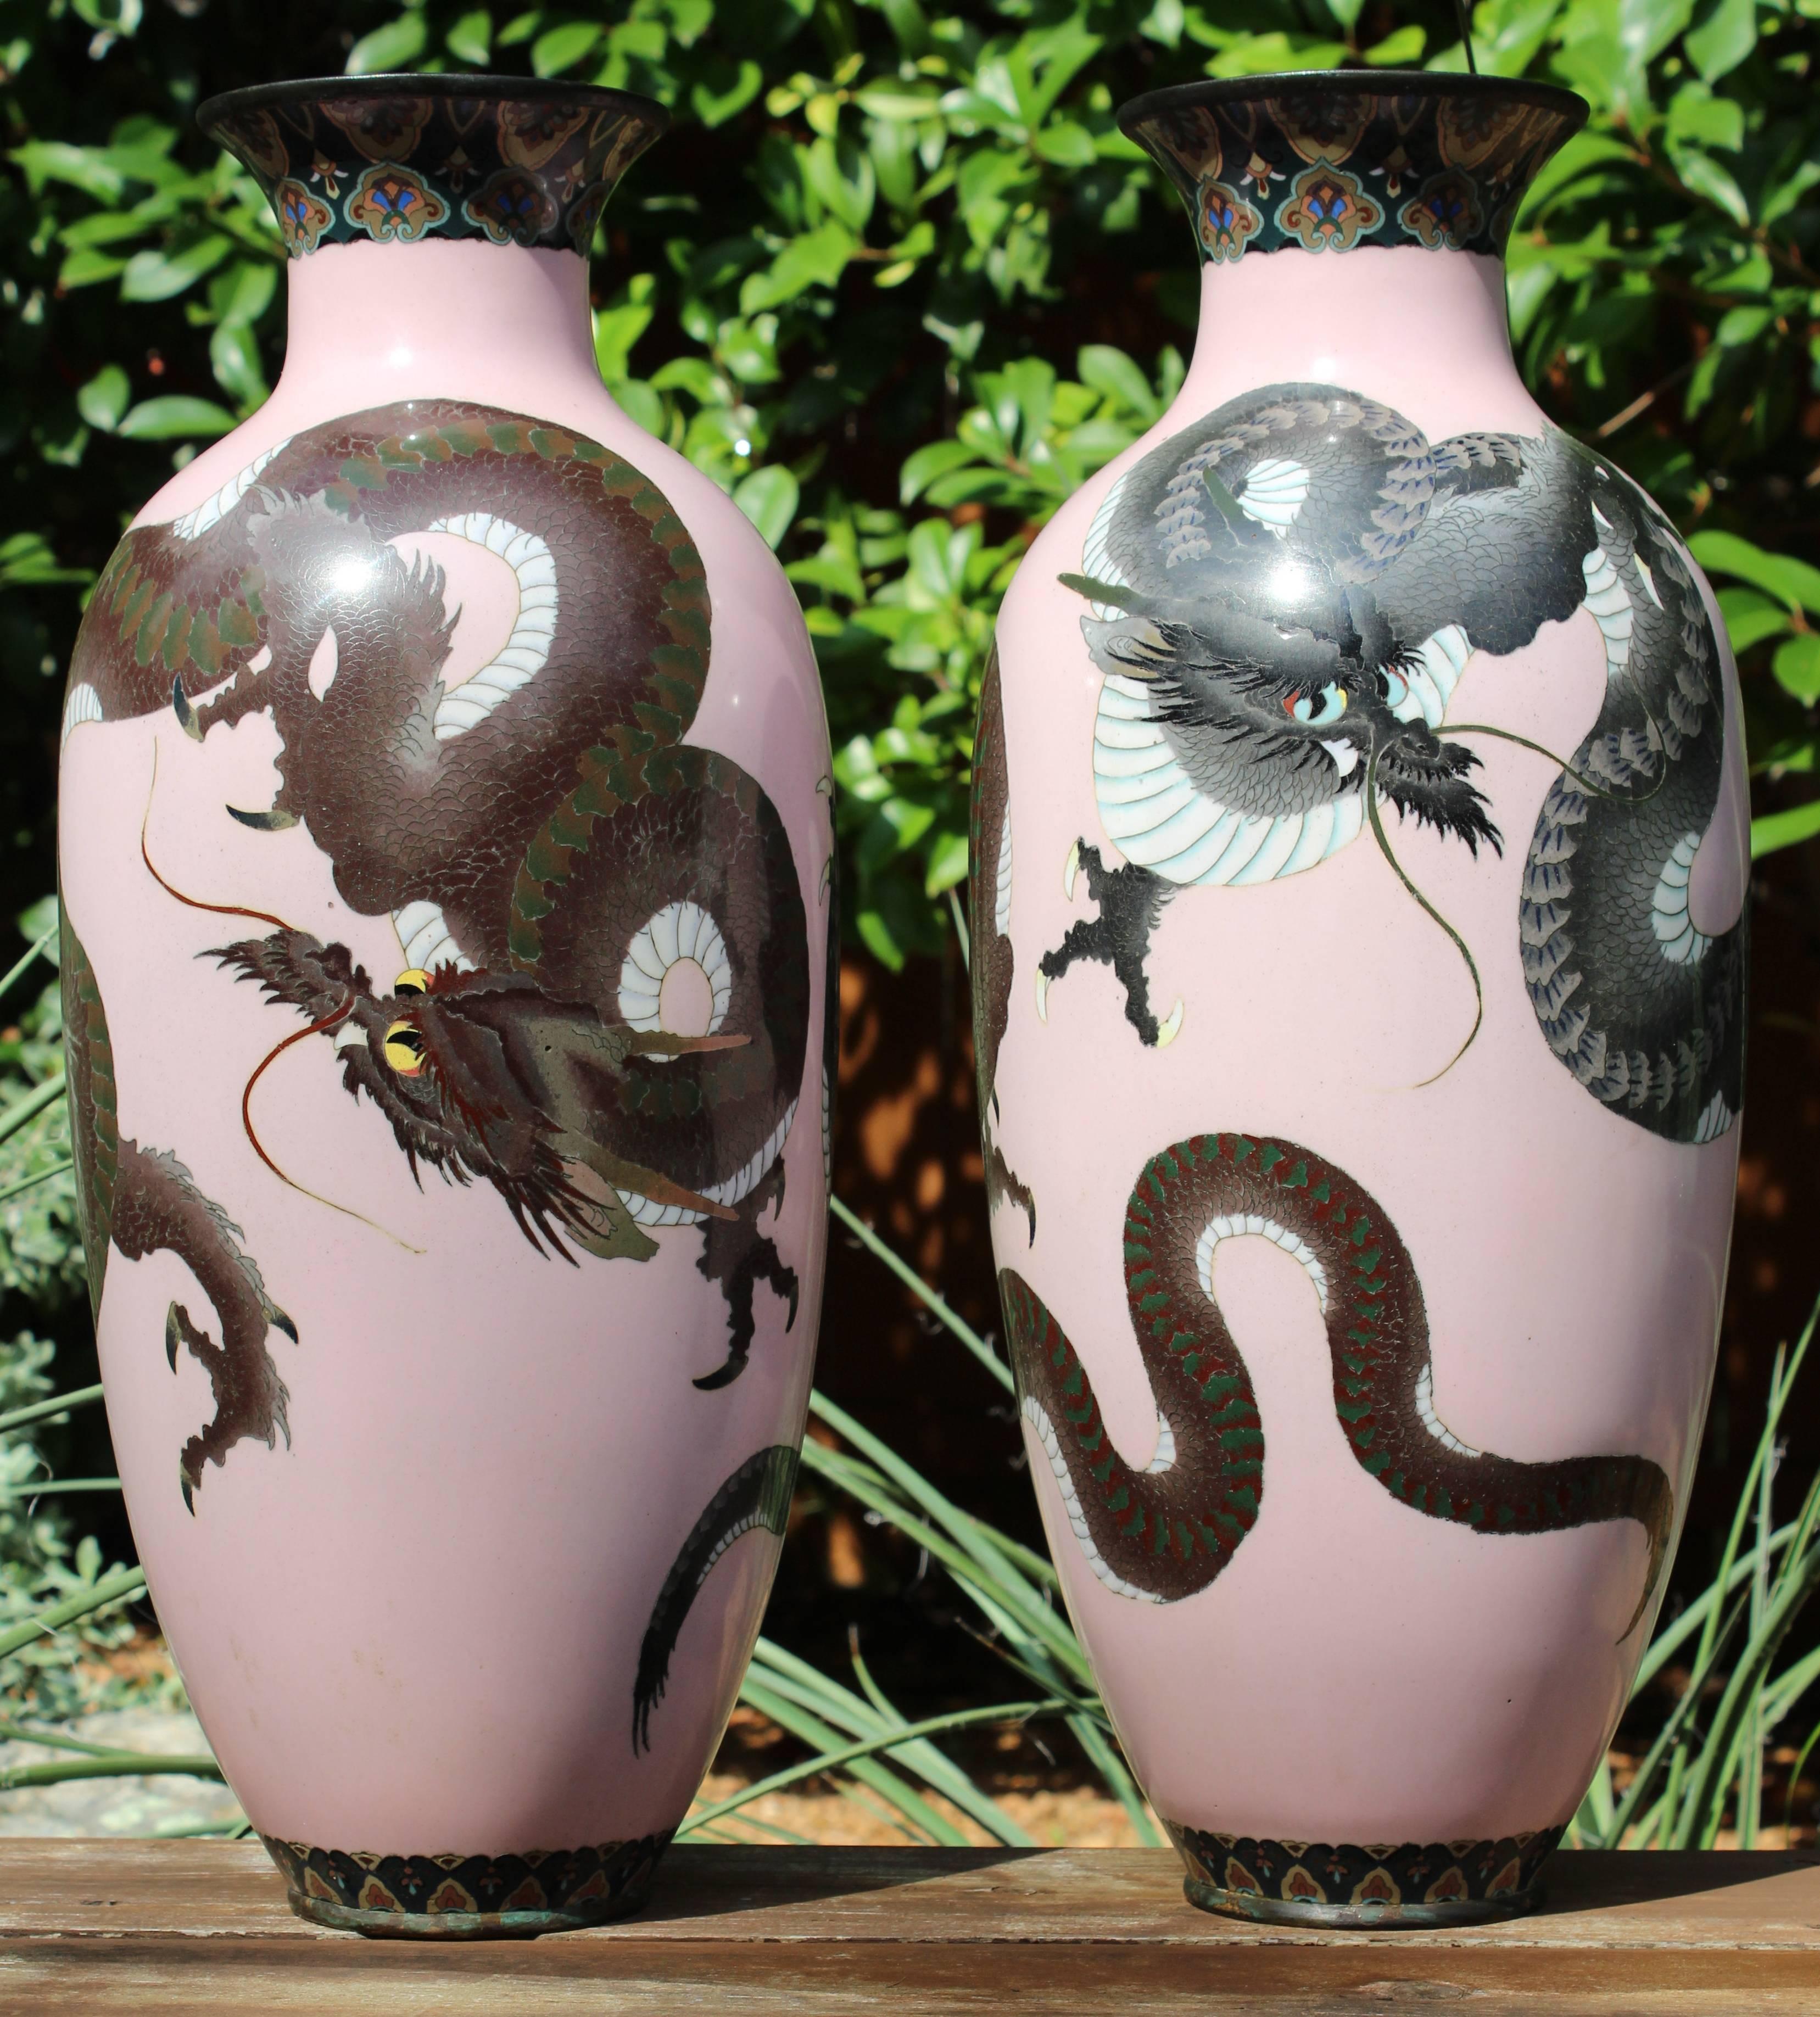 Pair of large Meiji Japanese cloisonné dragon vases. Rare monumental 18.5 inch high double dragons on pink backgrounds. 

Master workmanship in near mint condition with only wear commensurate of age.
 